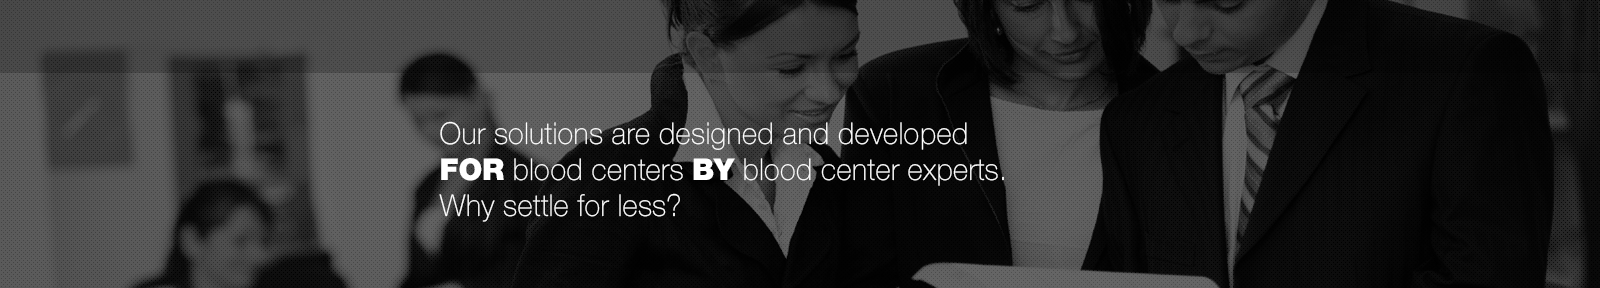 Software developed FOR blood centers BY blood center experts. Why settle for less?